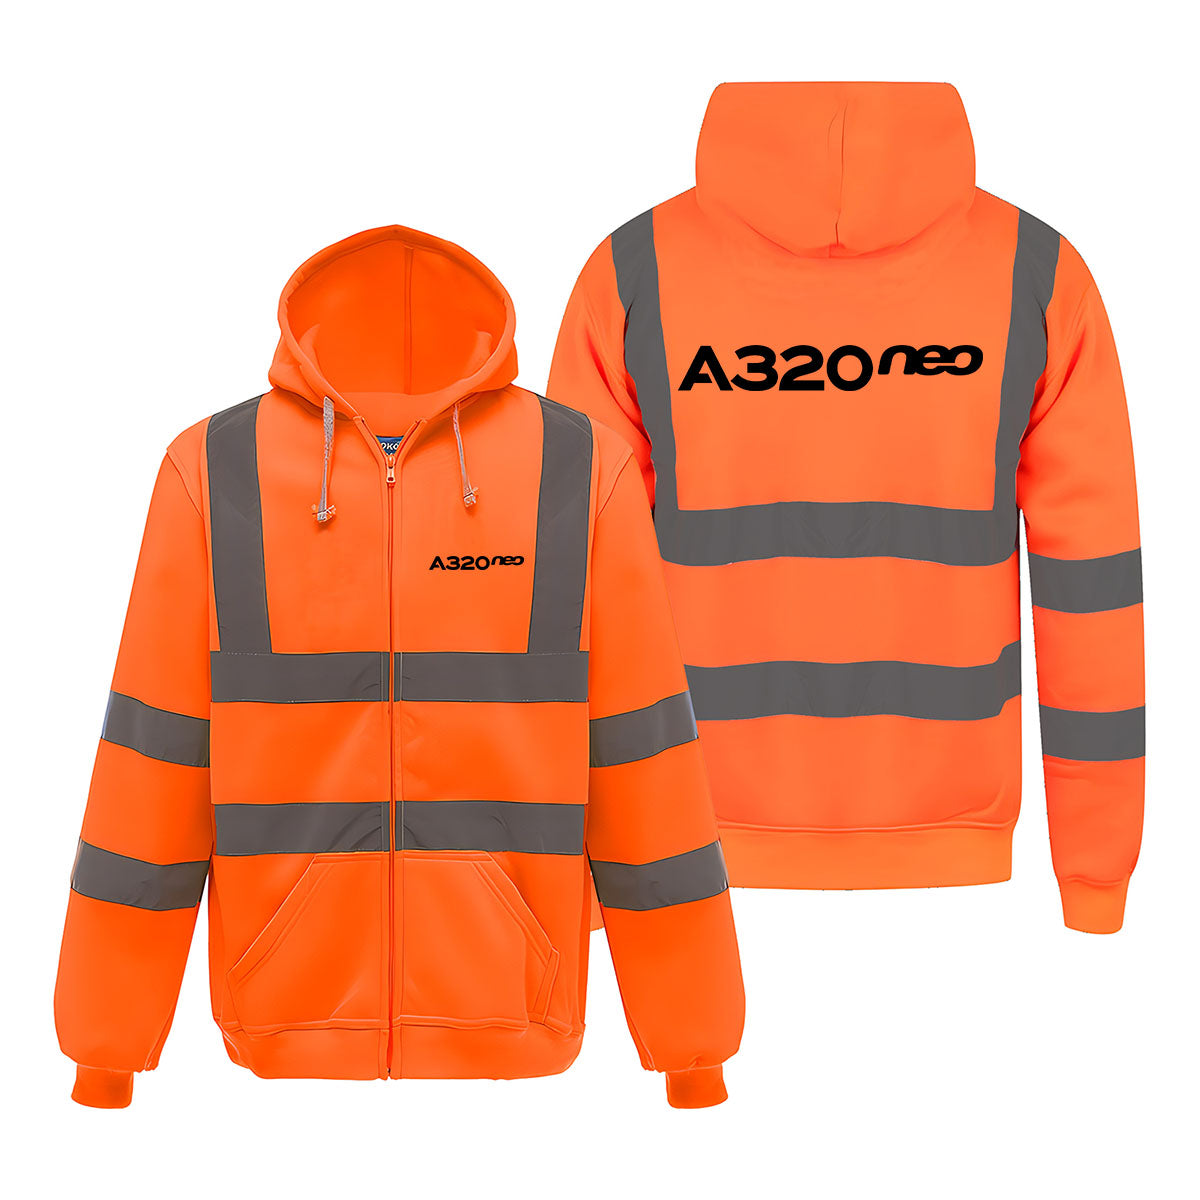 A320neo & Text Designed Reflective Zipped Hoodies